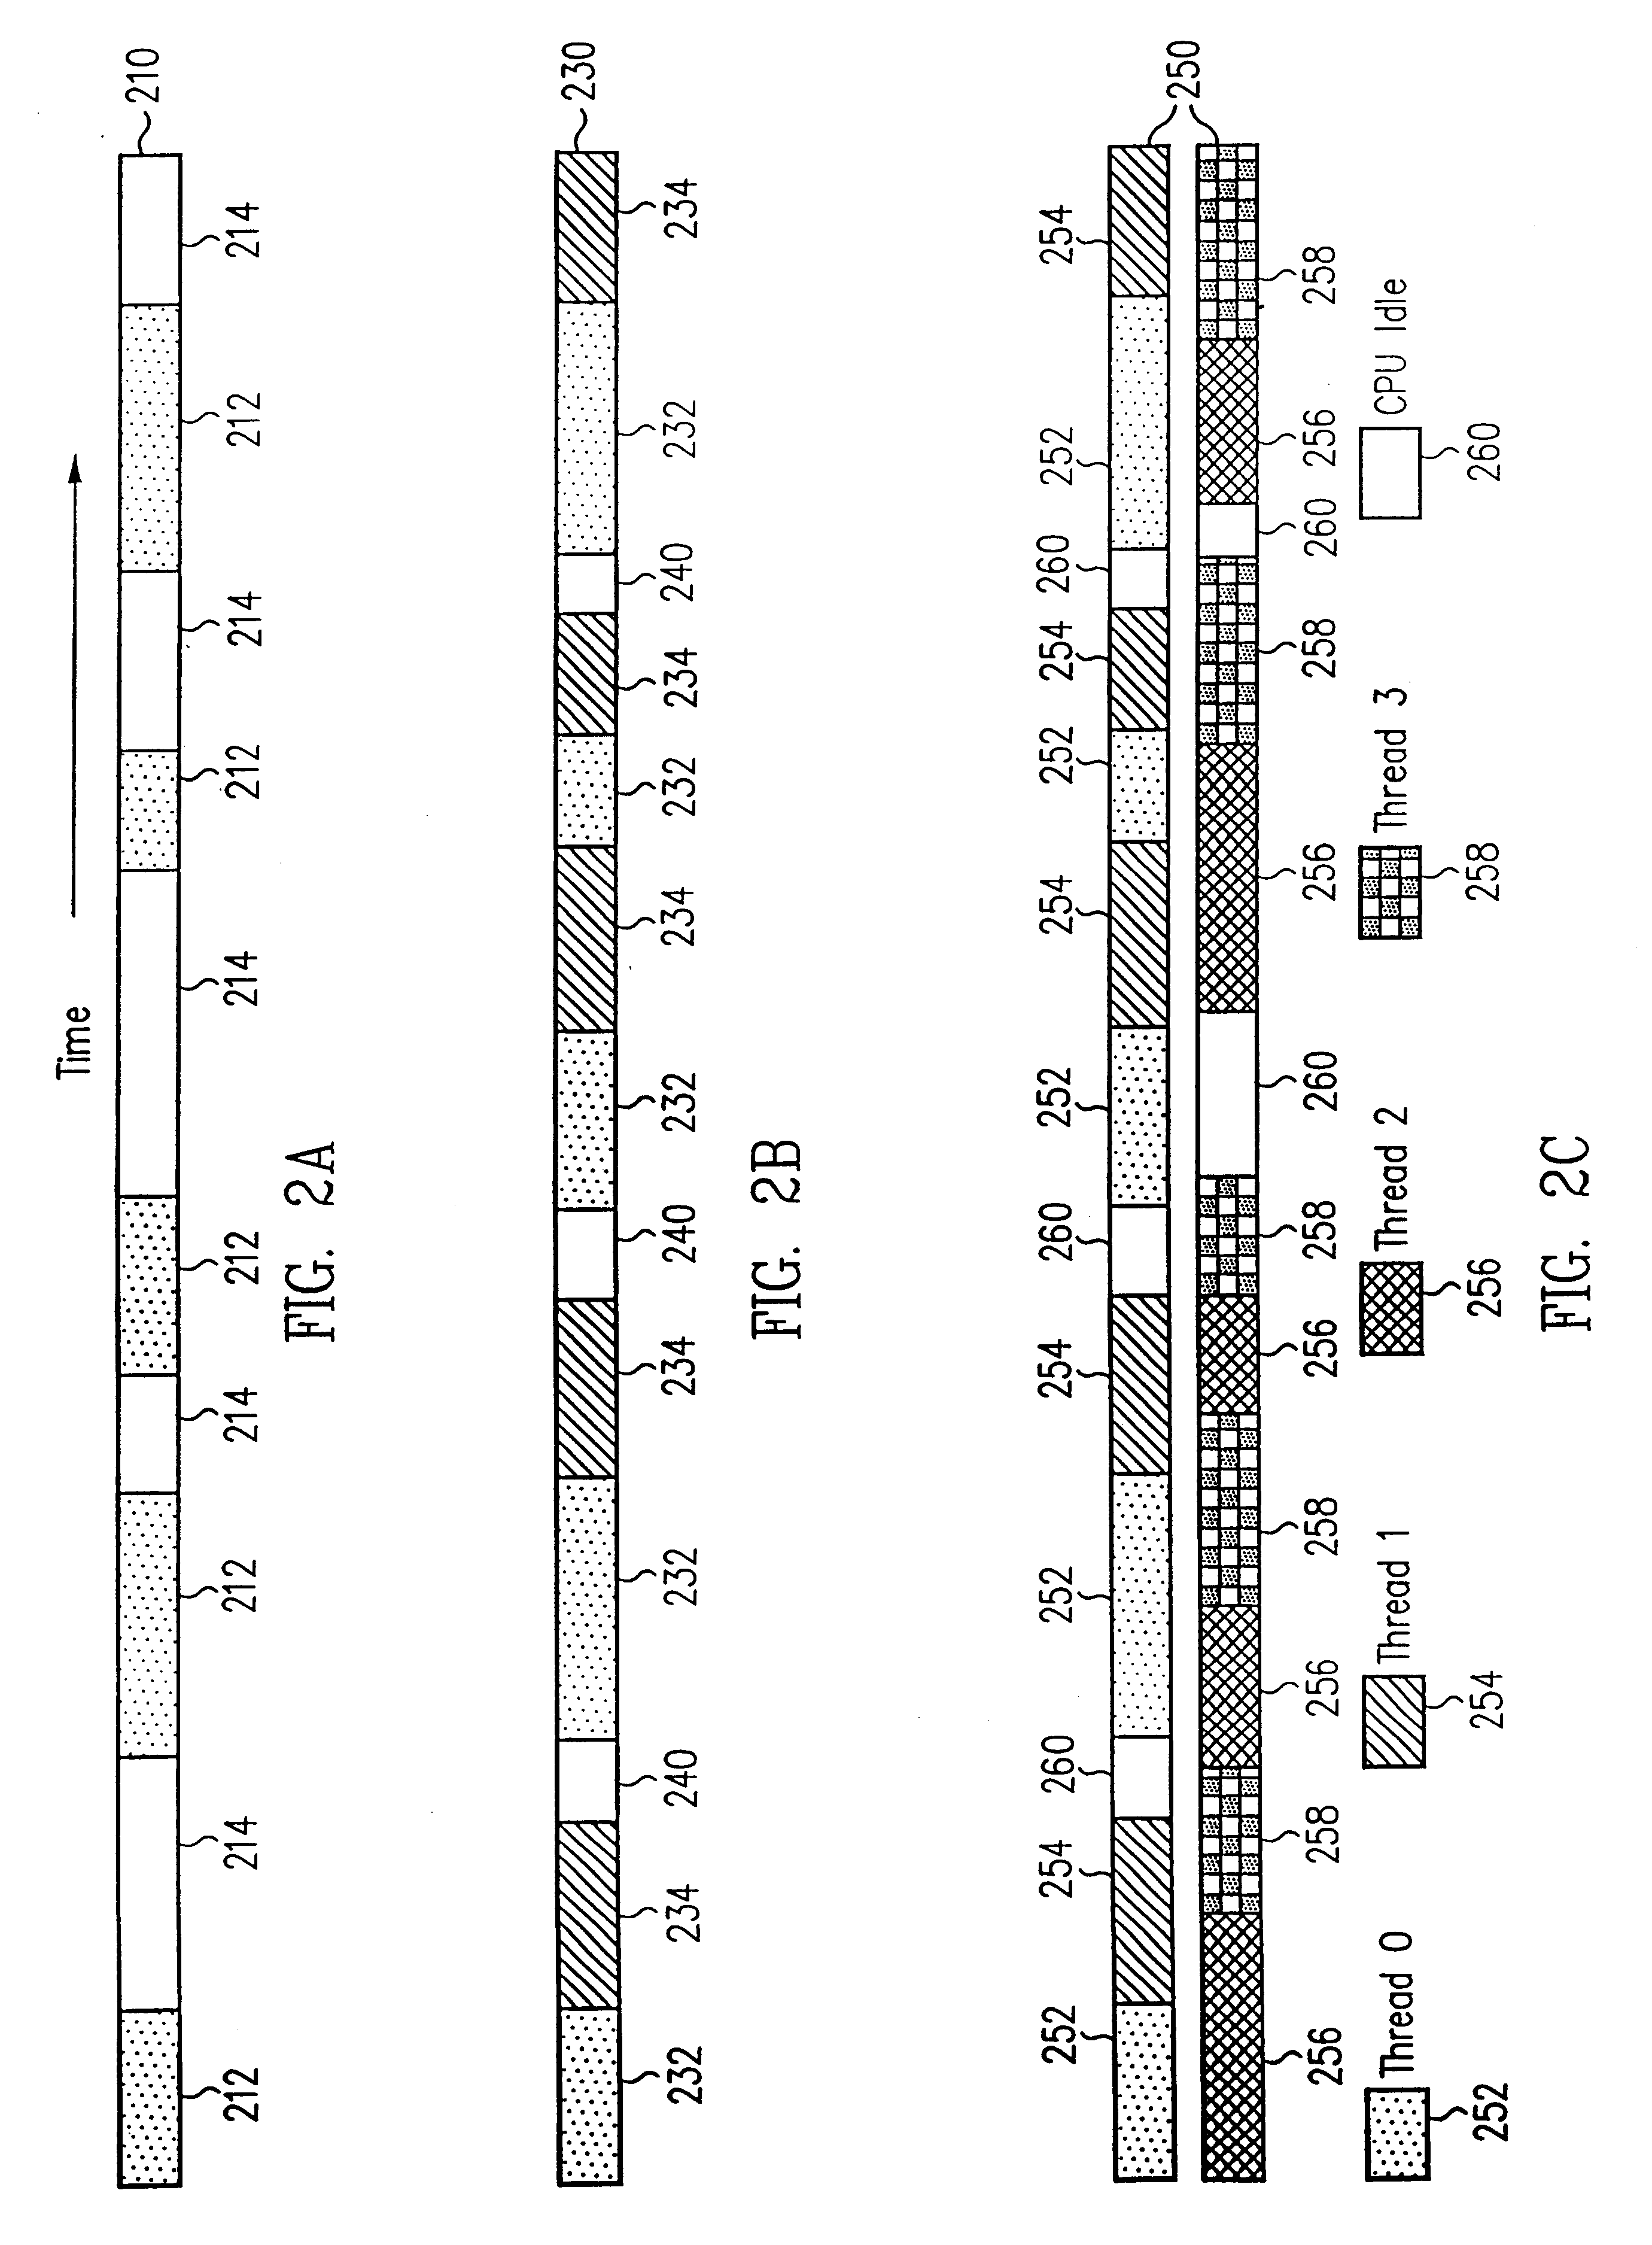 Vertically and horizontally threaded processor with multidimensional storage for storing thread data